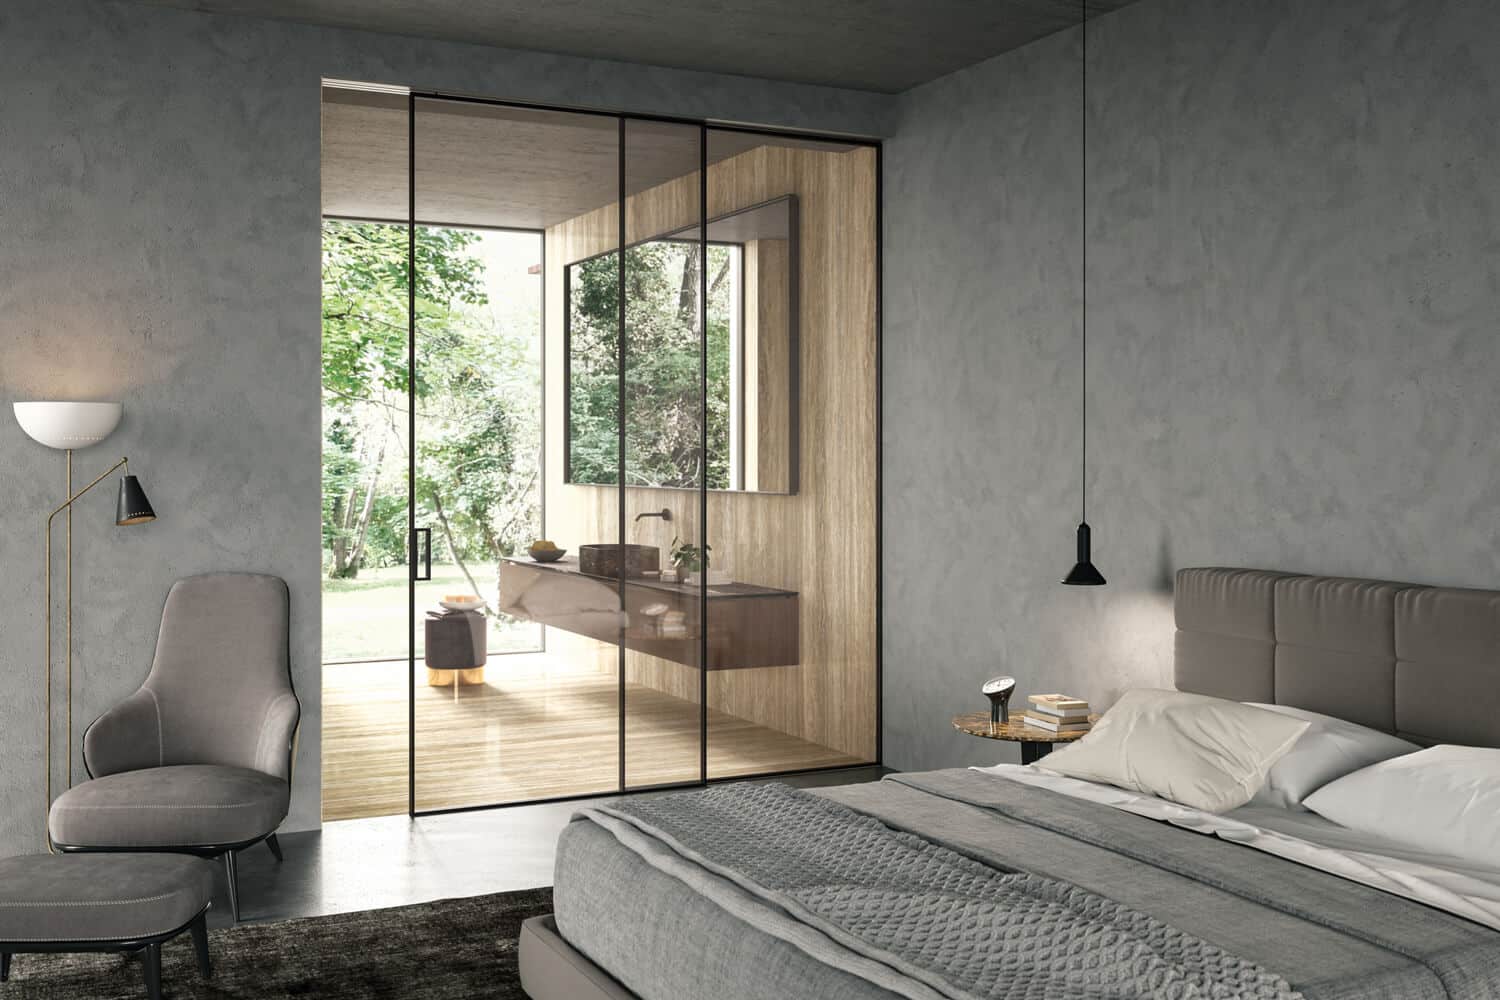 The minimalist Manhattan door in clear glass with Black finish provides both separation and continuity between the bedroom and the master bath, while expanding the room. The sliding door system allows you to make full use of the space.